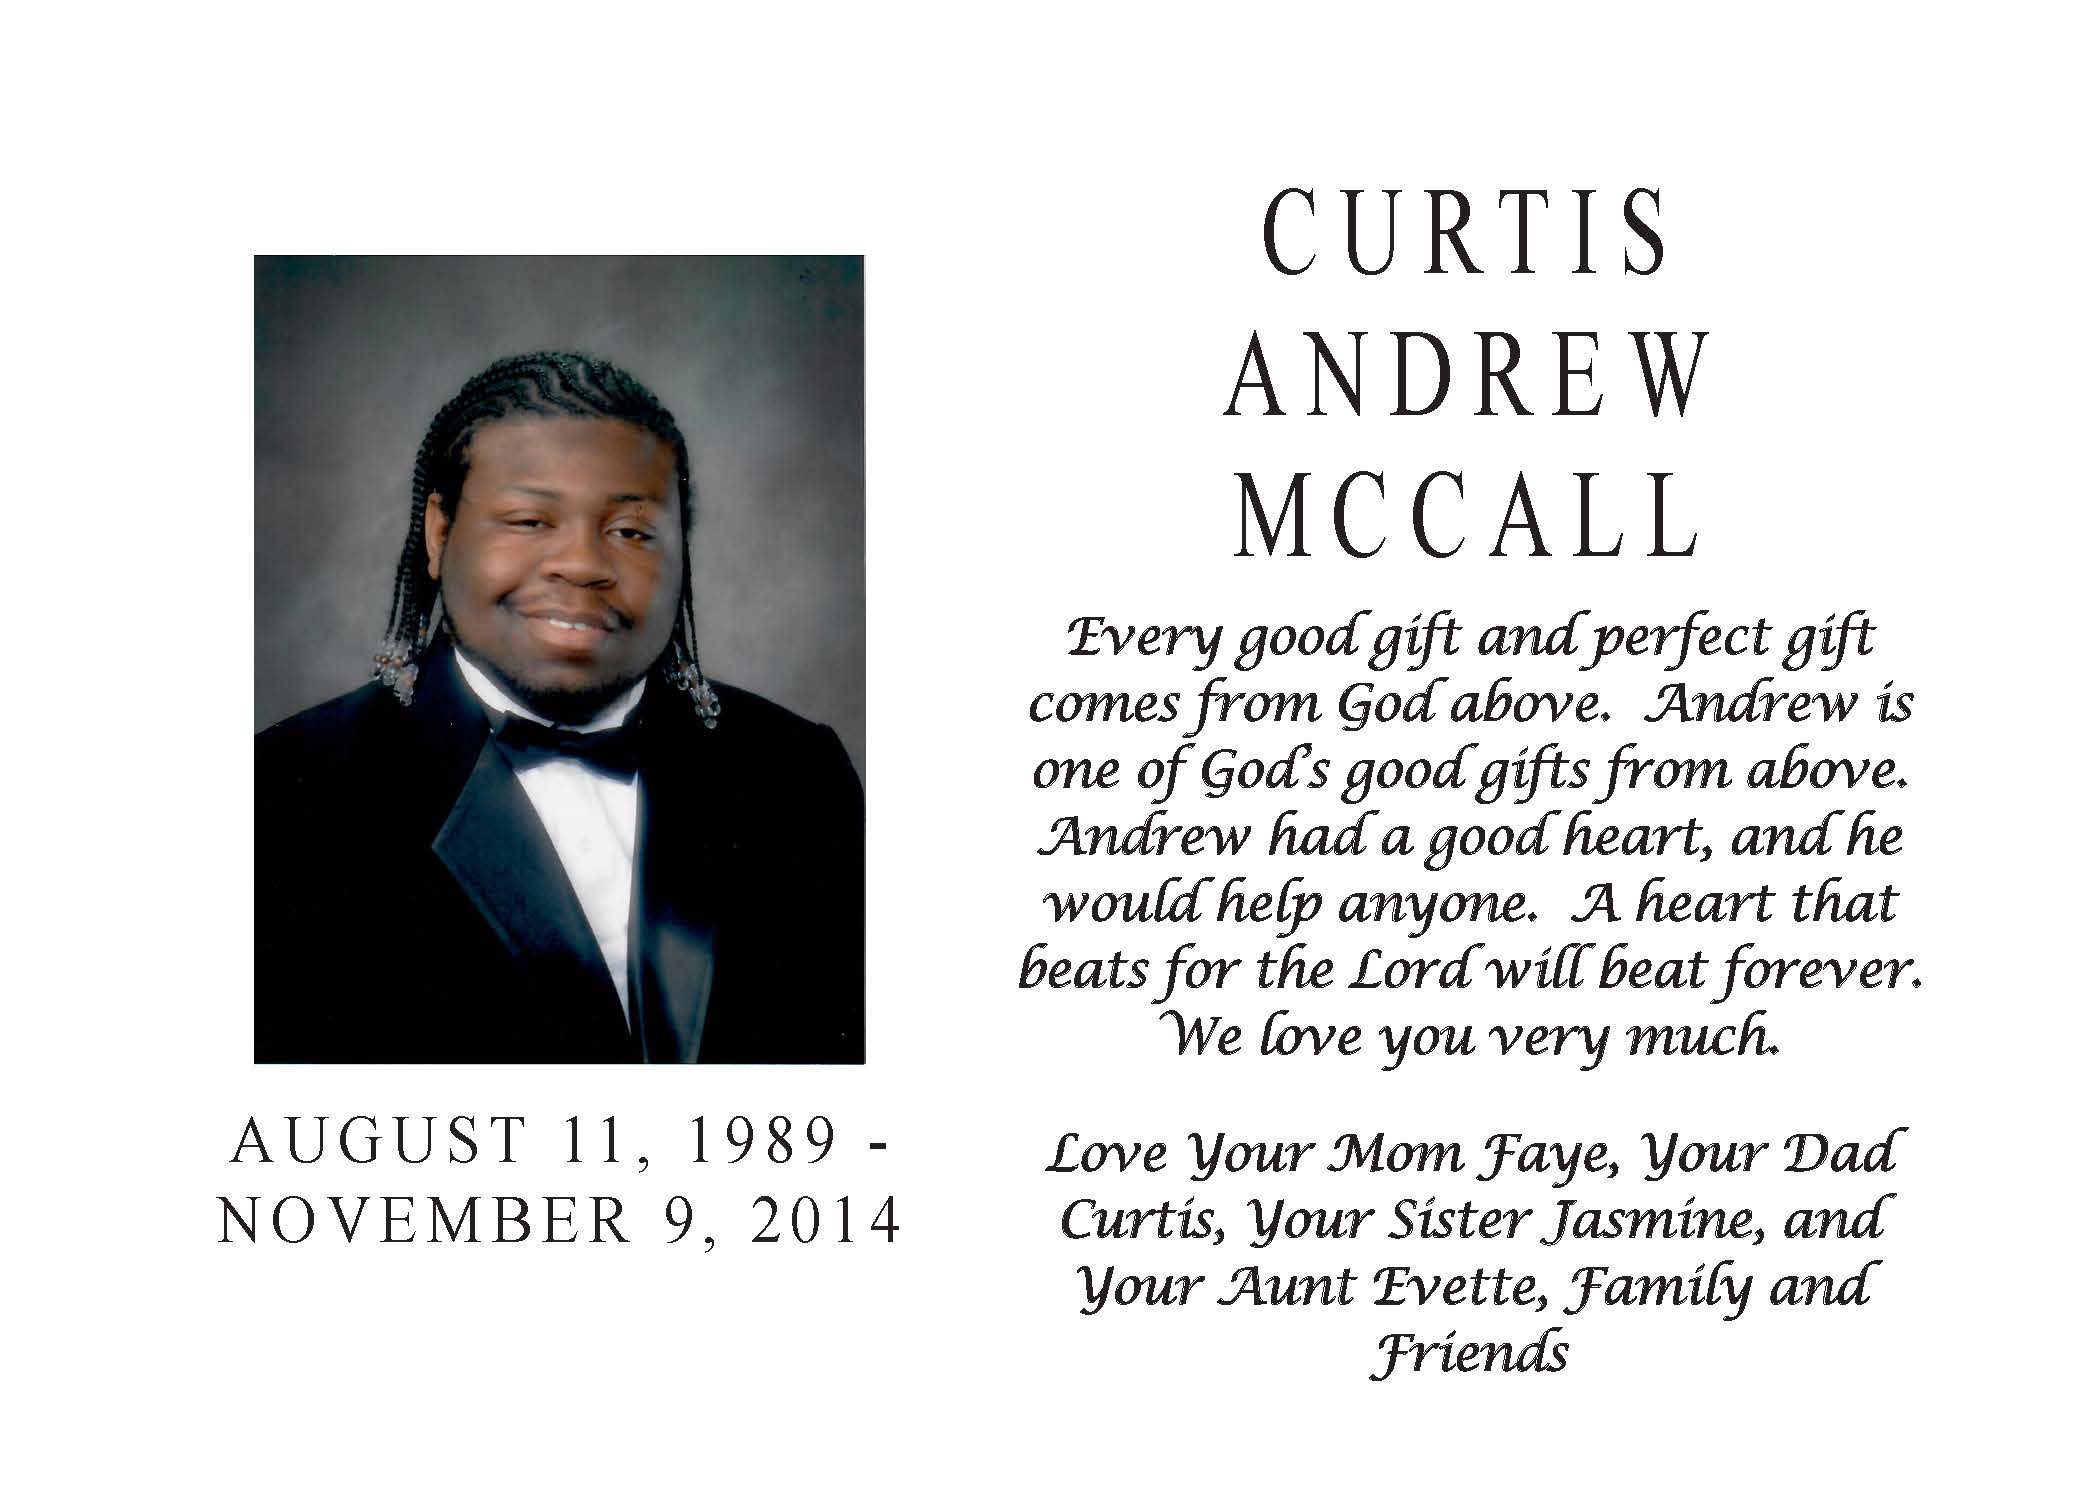 Curtis Andrew McCall